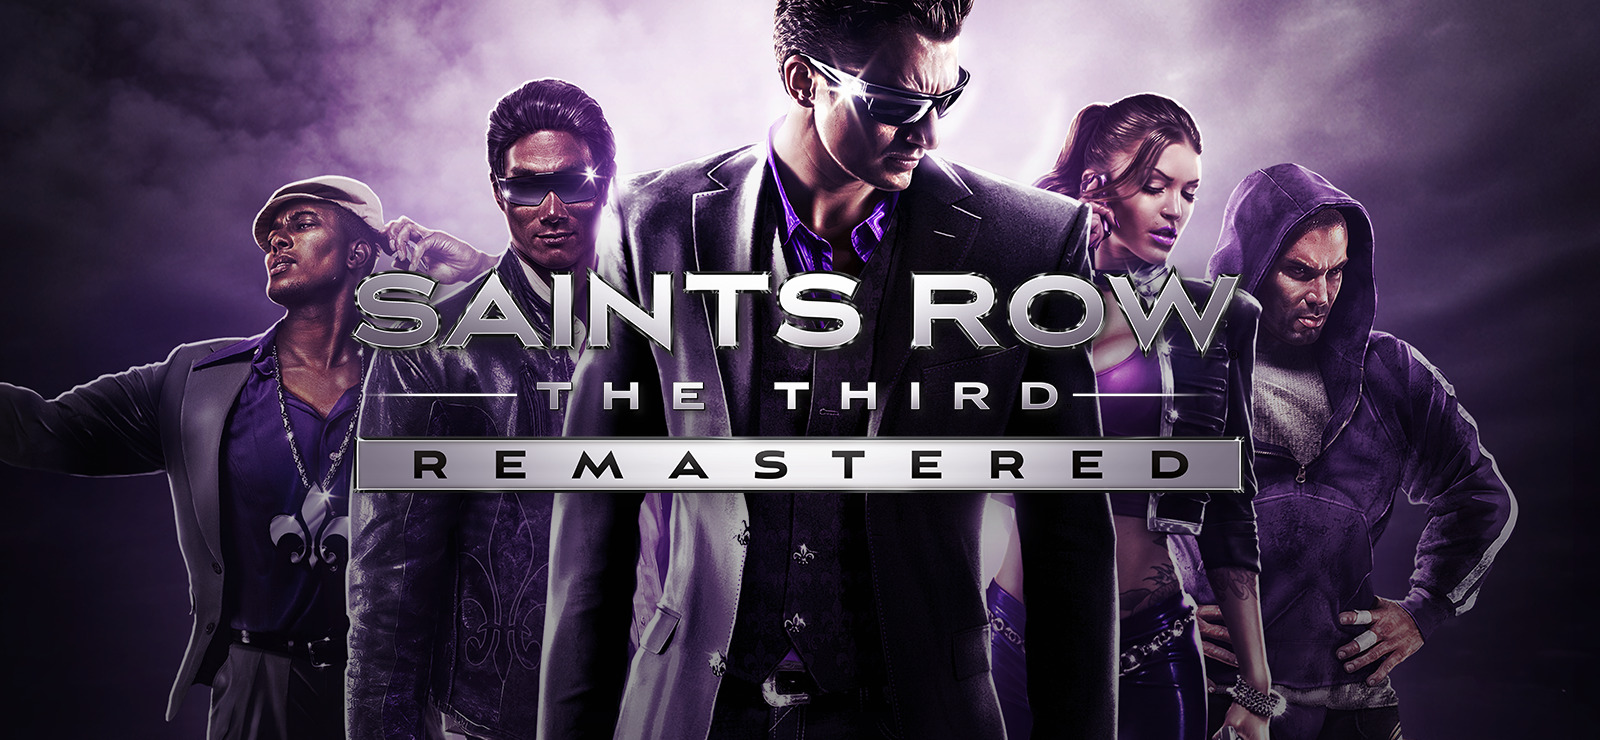 Saints Row PC Hands-On PC Preview - Epic Games Store